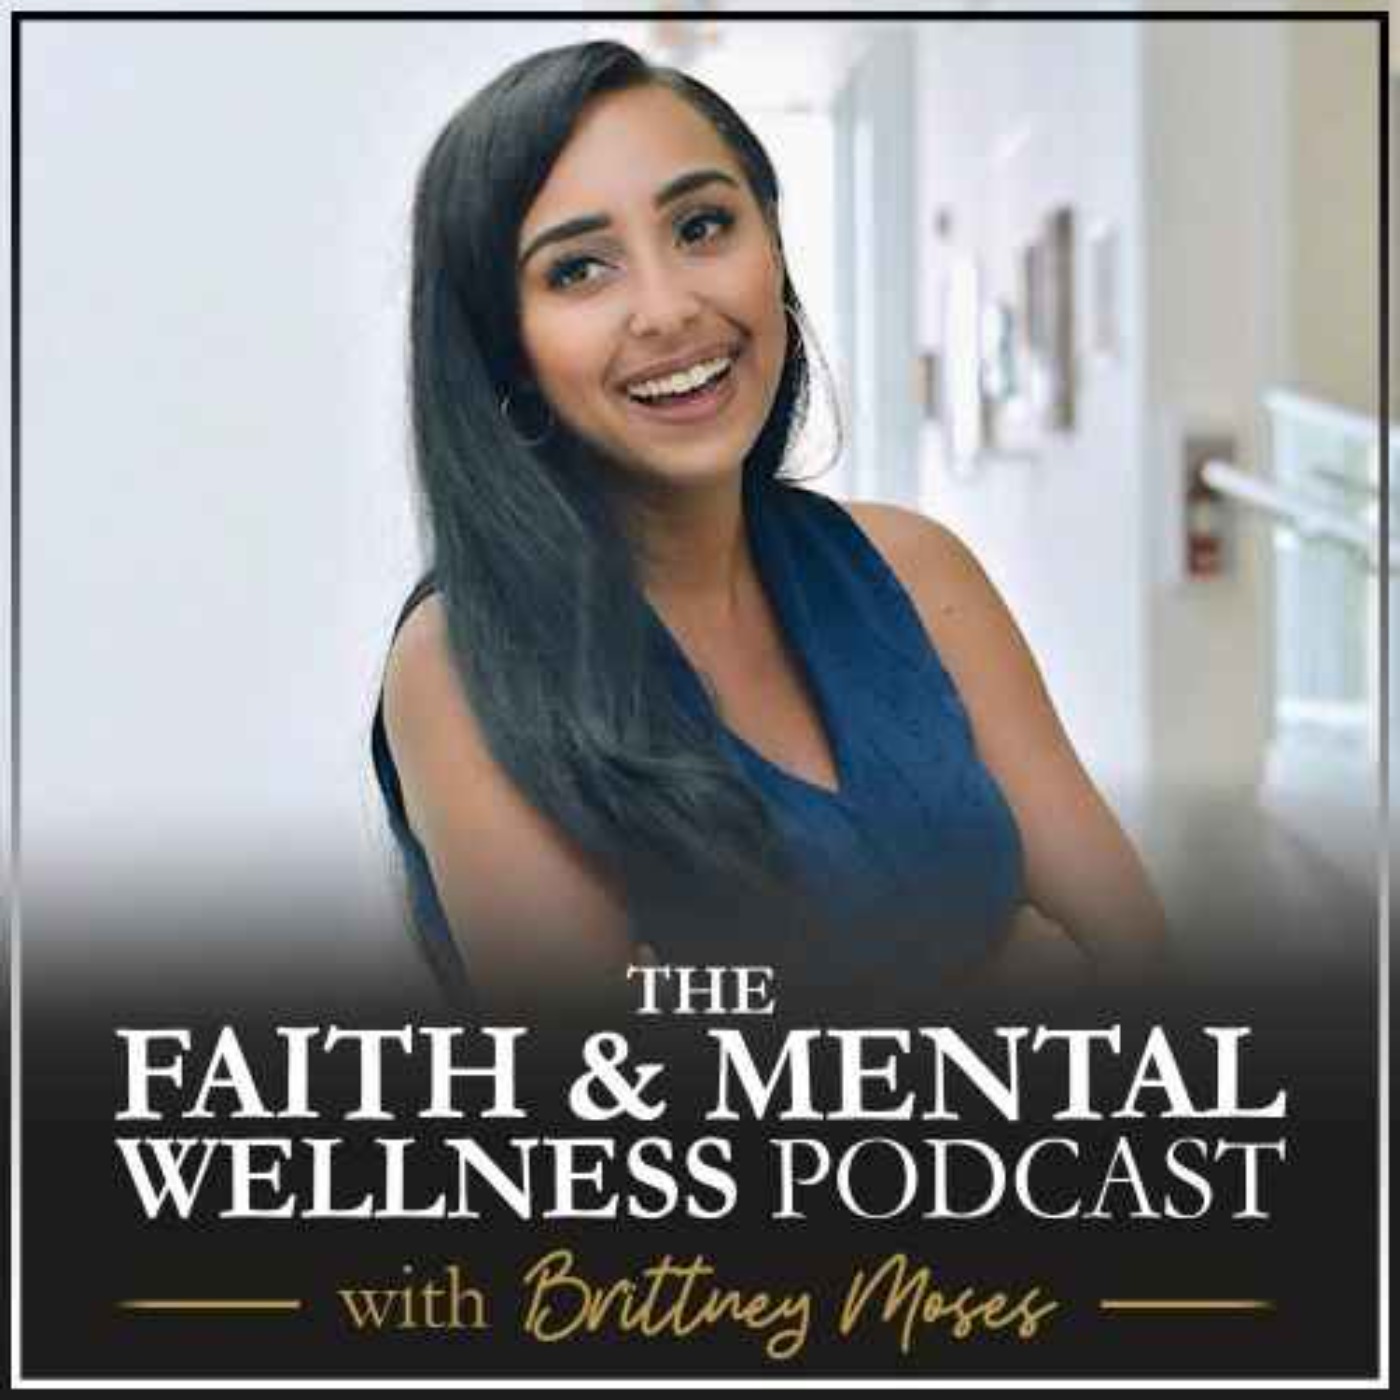 022: The Messages Our Bodies Send Us: A Holistic Perspective on Faith, Embodiment & Mental Health with Brooke Boon